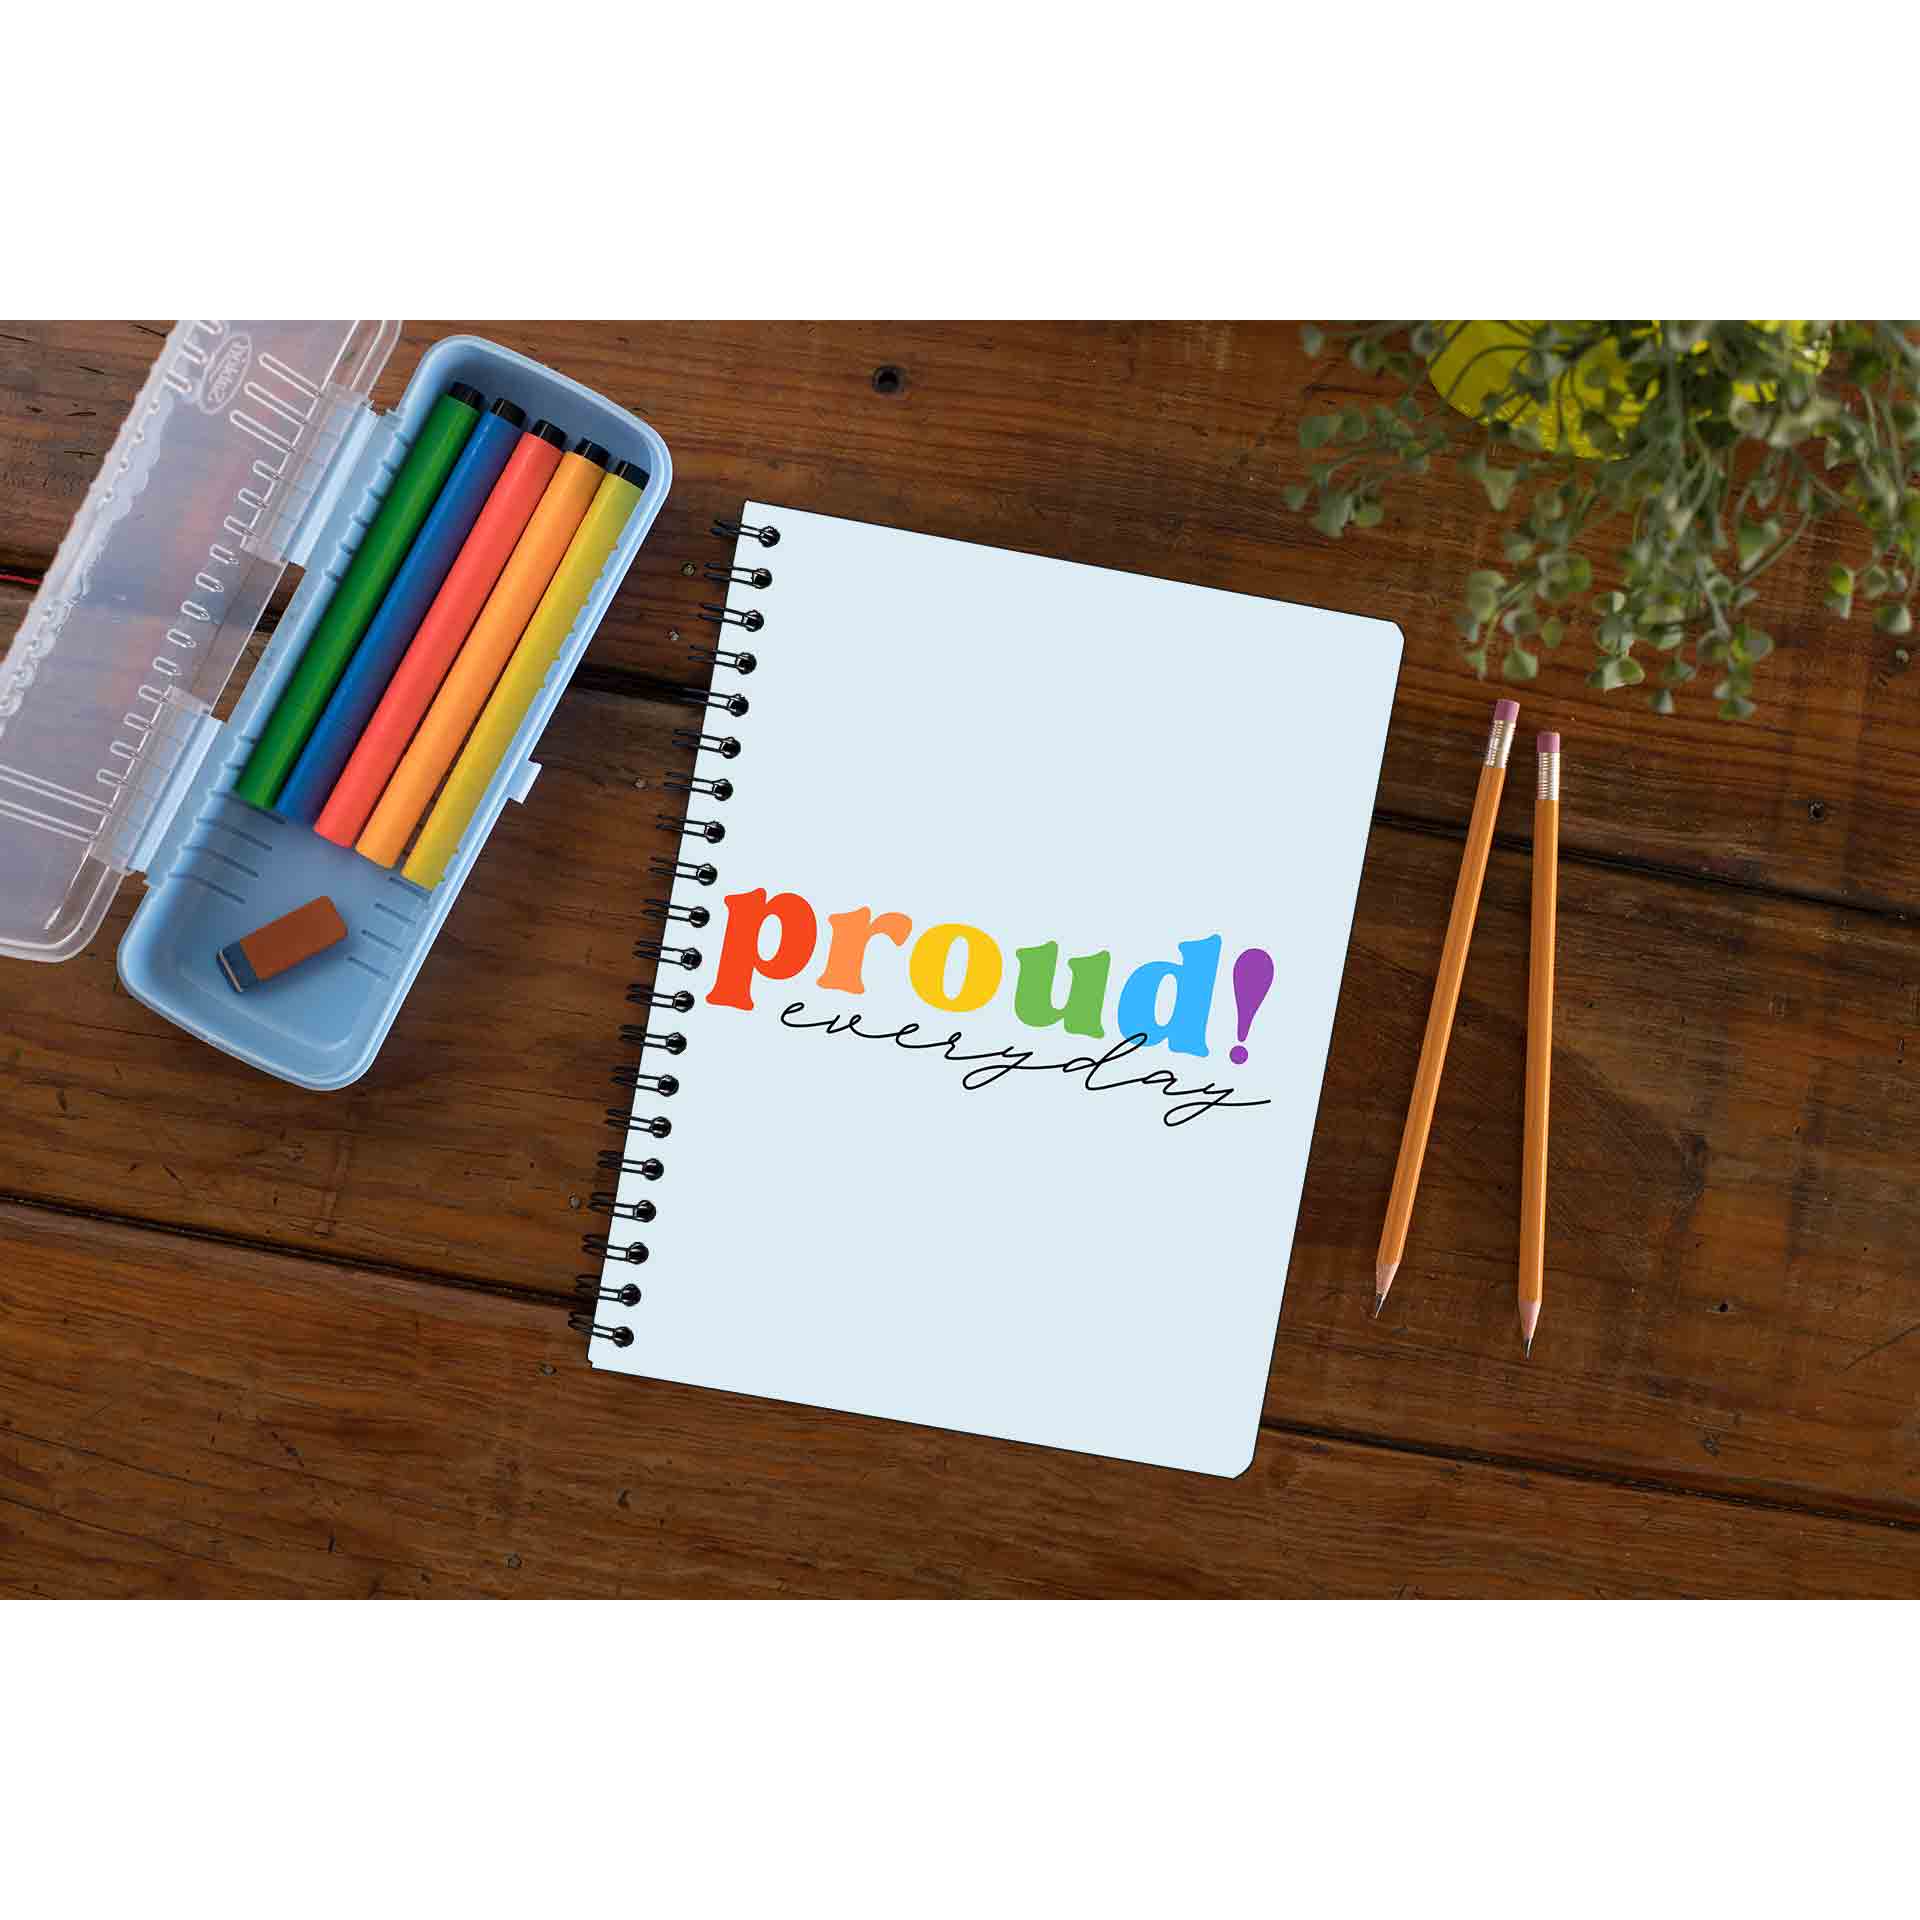 pride proud everyday notebook notepad diary buy online india the banyan tee tbt unruled - lgbtqia+